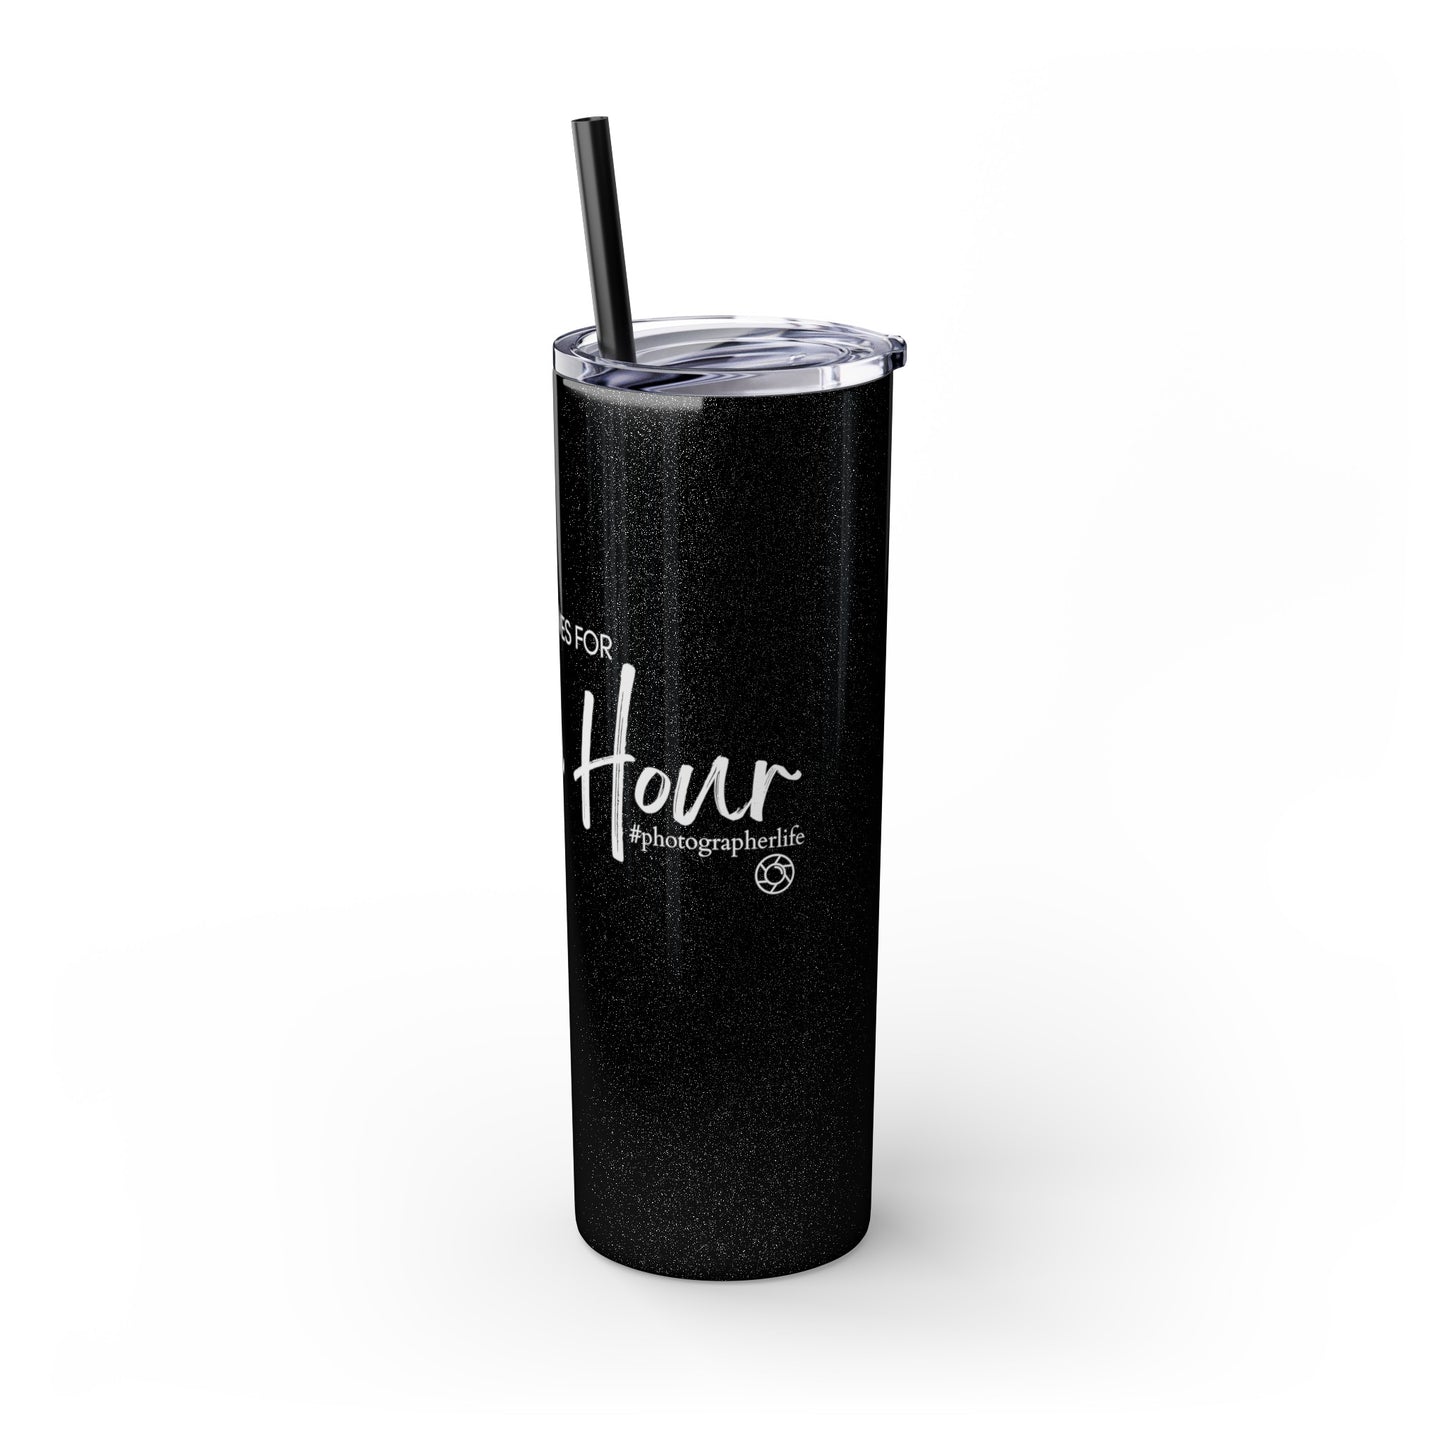 Golden Hour Girl - Skinny Tumbler with Straw, 20oz